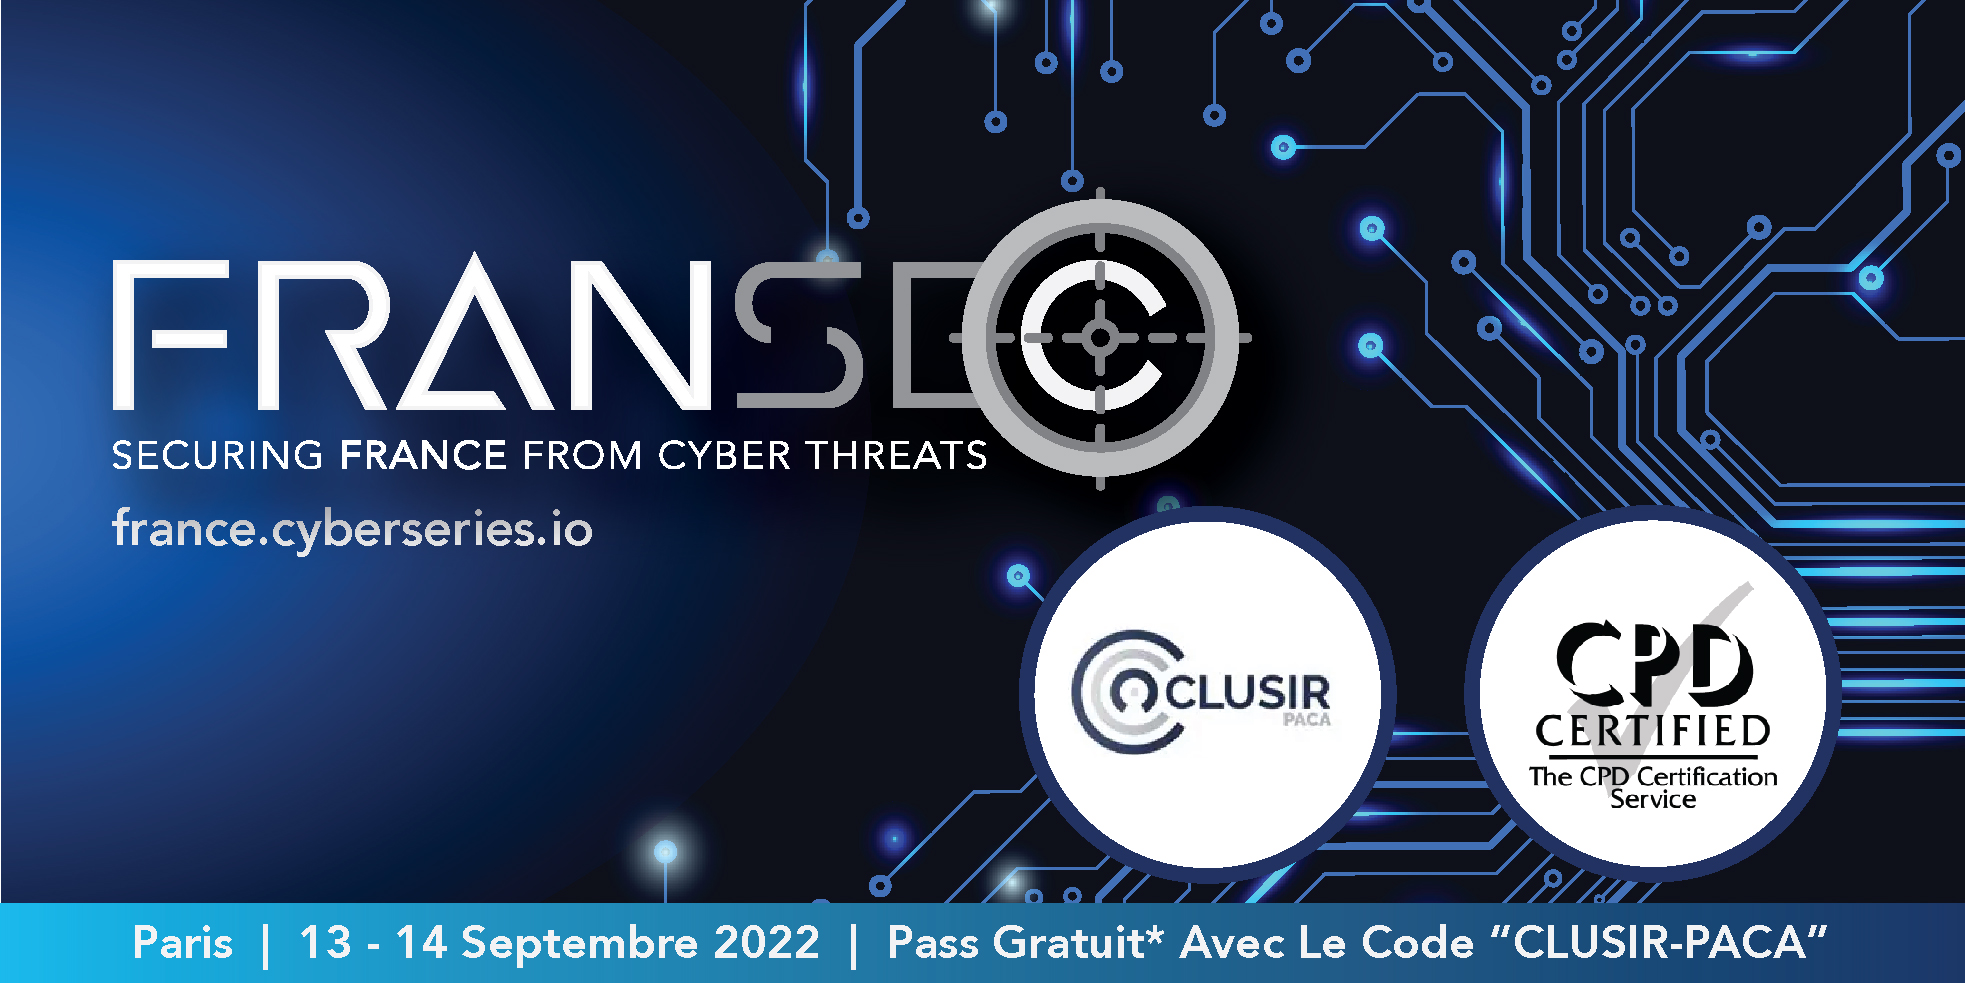 FRANSEC – SECURING FRANCE FROM CYBERS THREATS